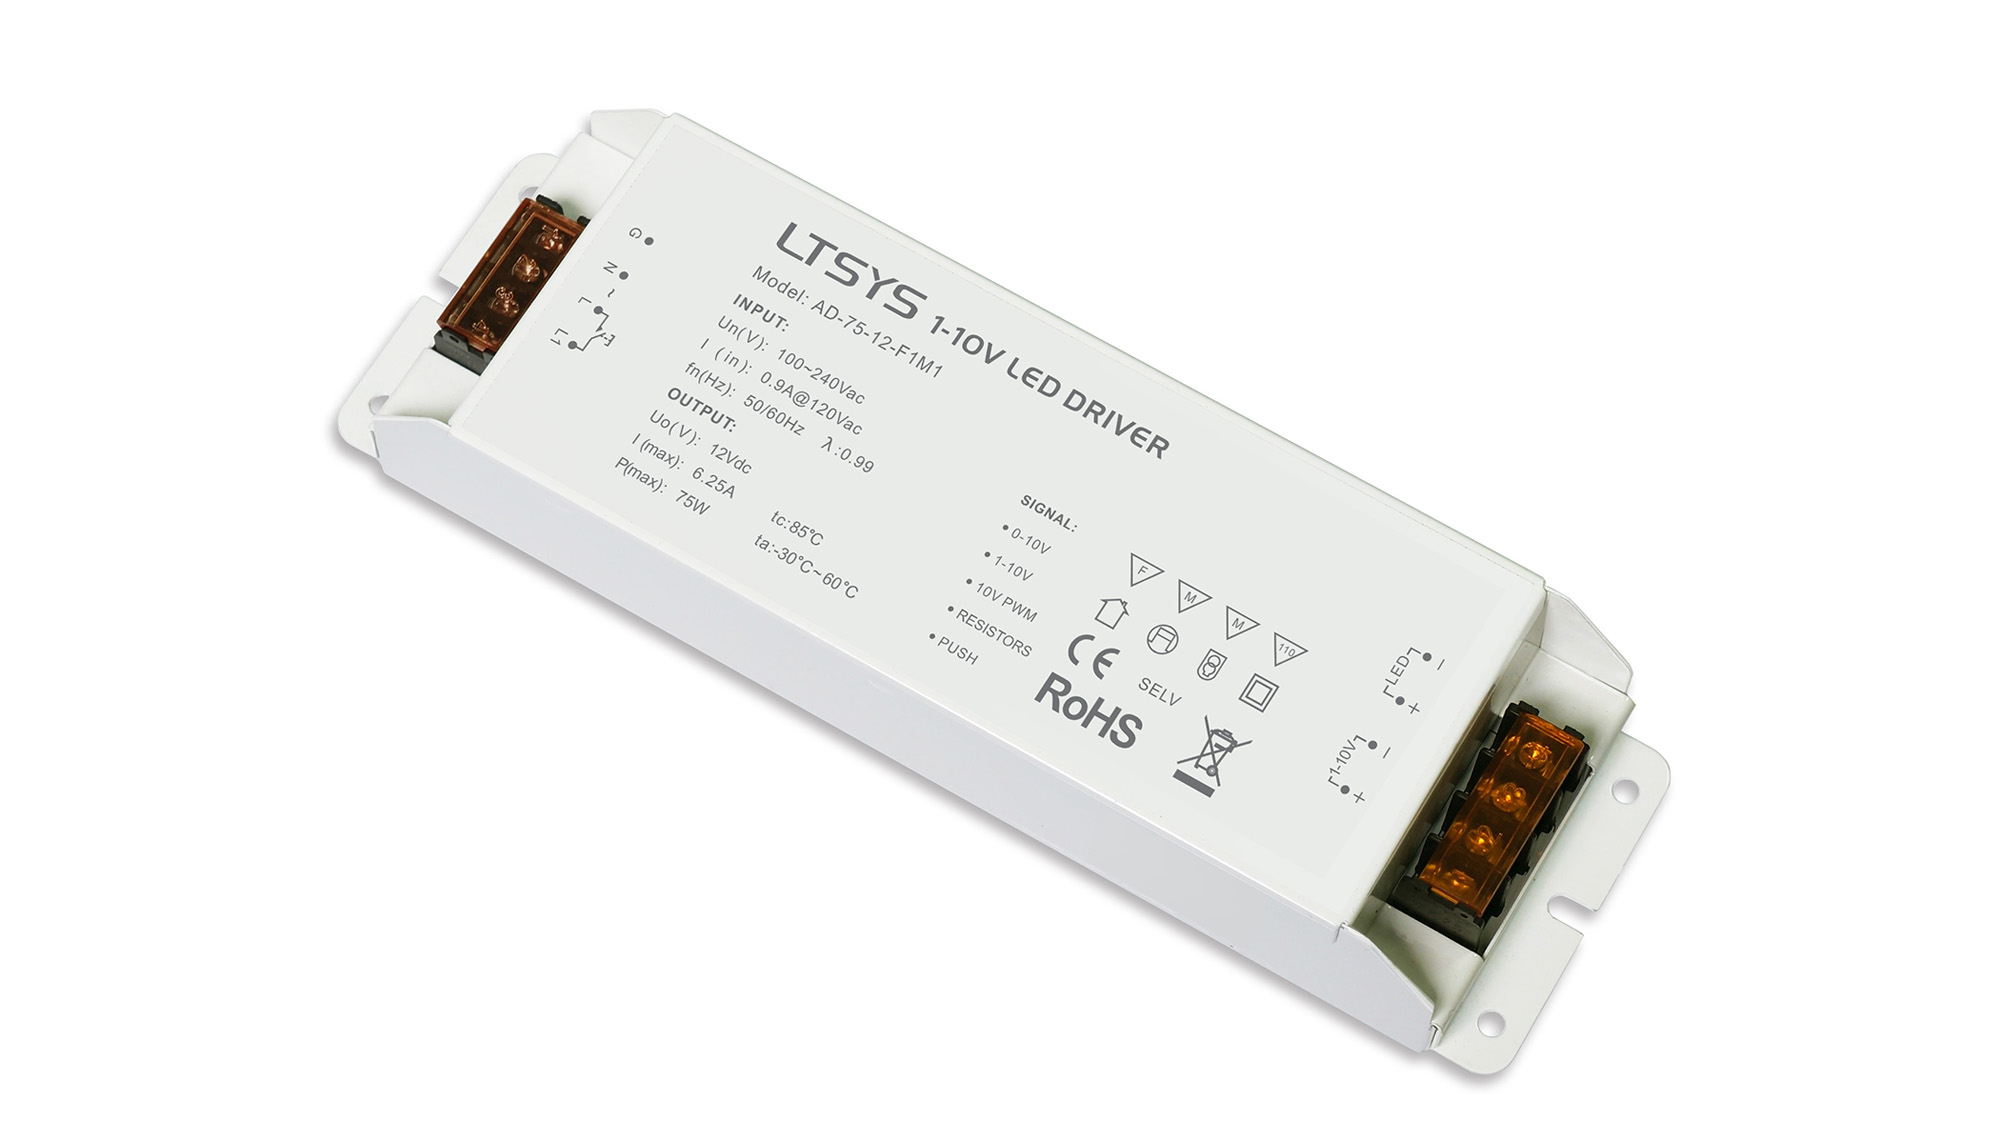 AD-75-12-F1M1  PWM Push Dim 75W Voltage Dimmable Driver